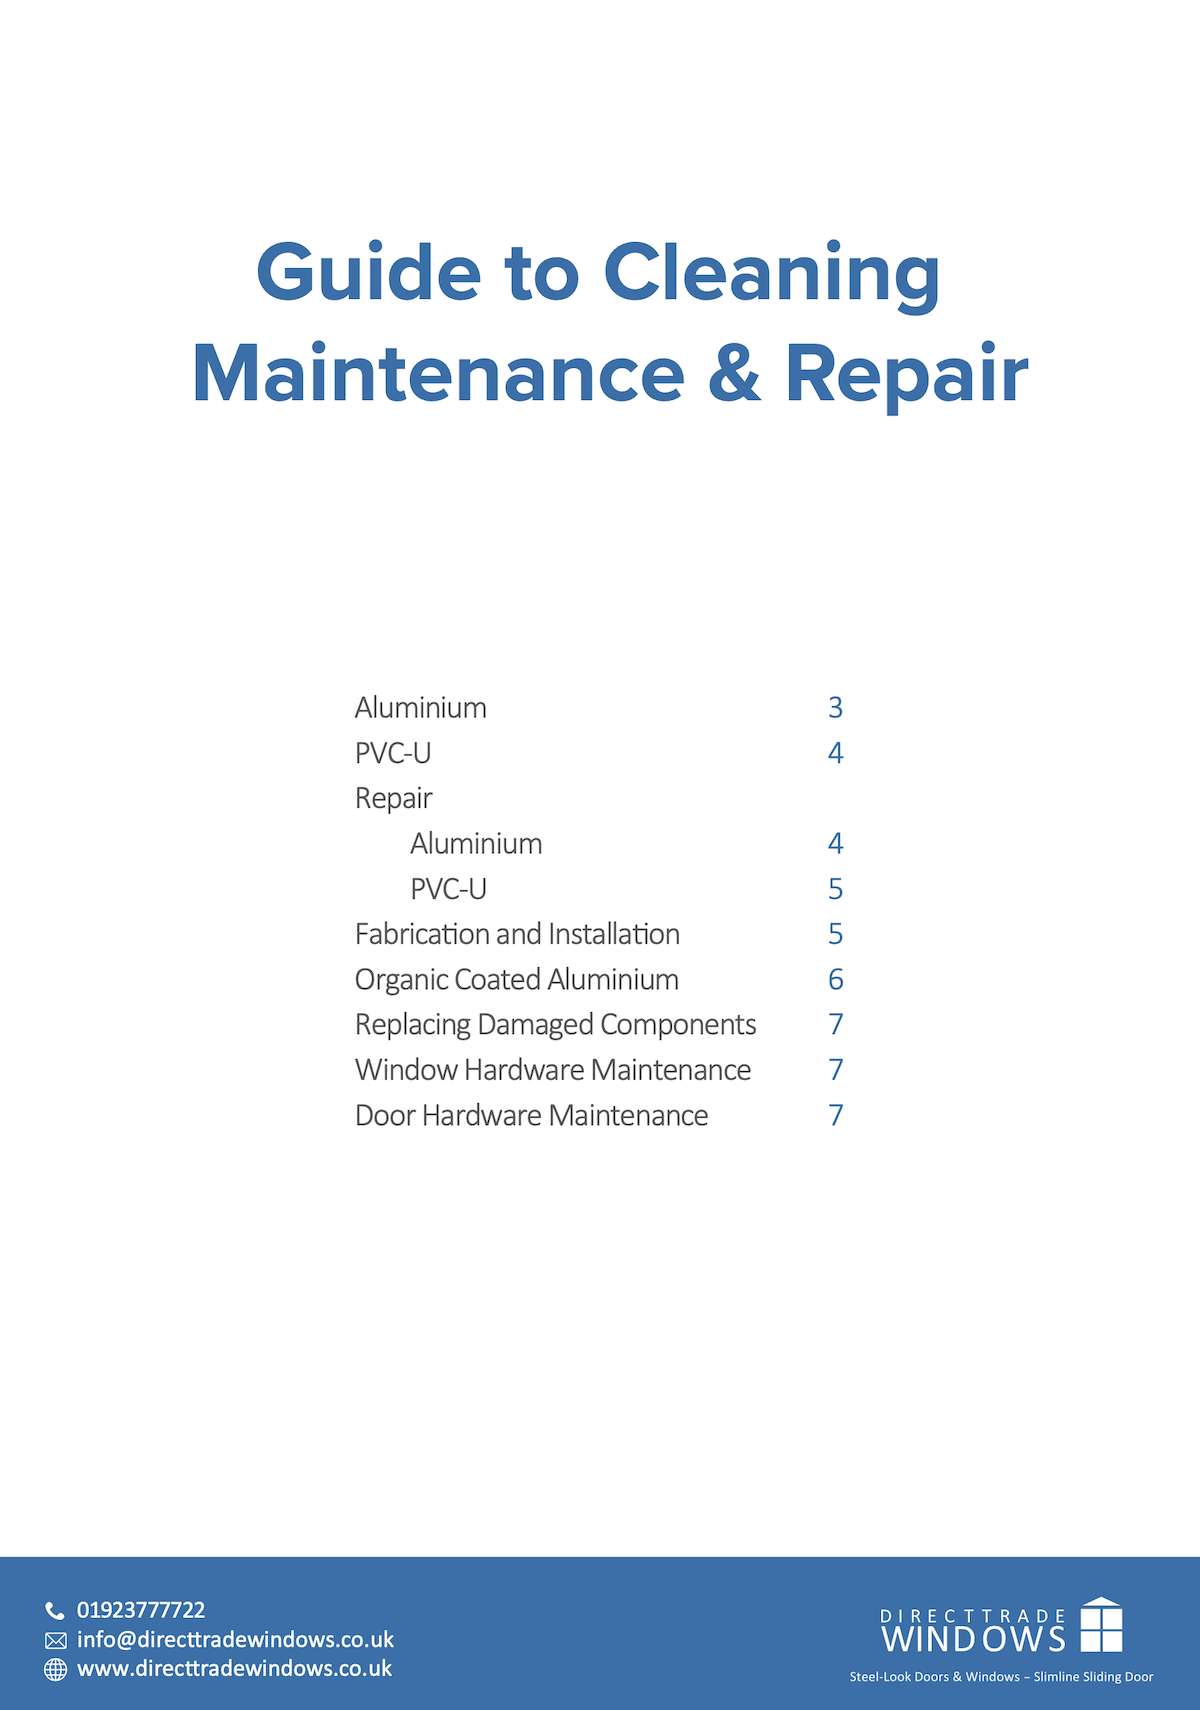 Guide to maintenance and repair